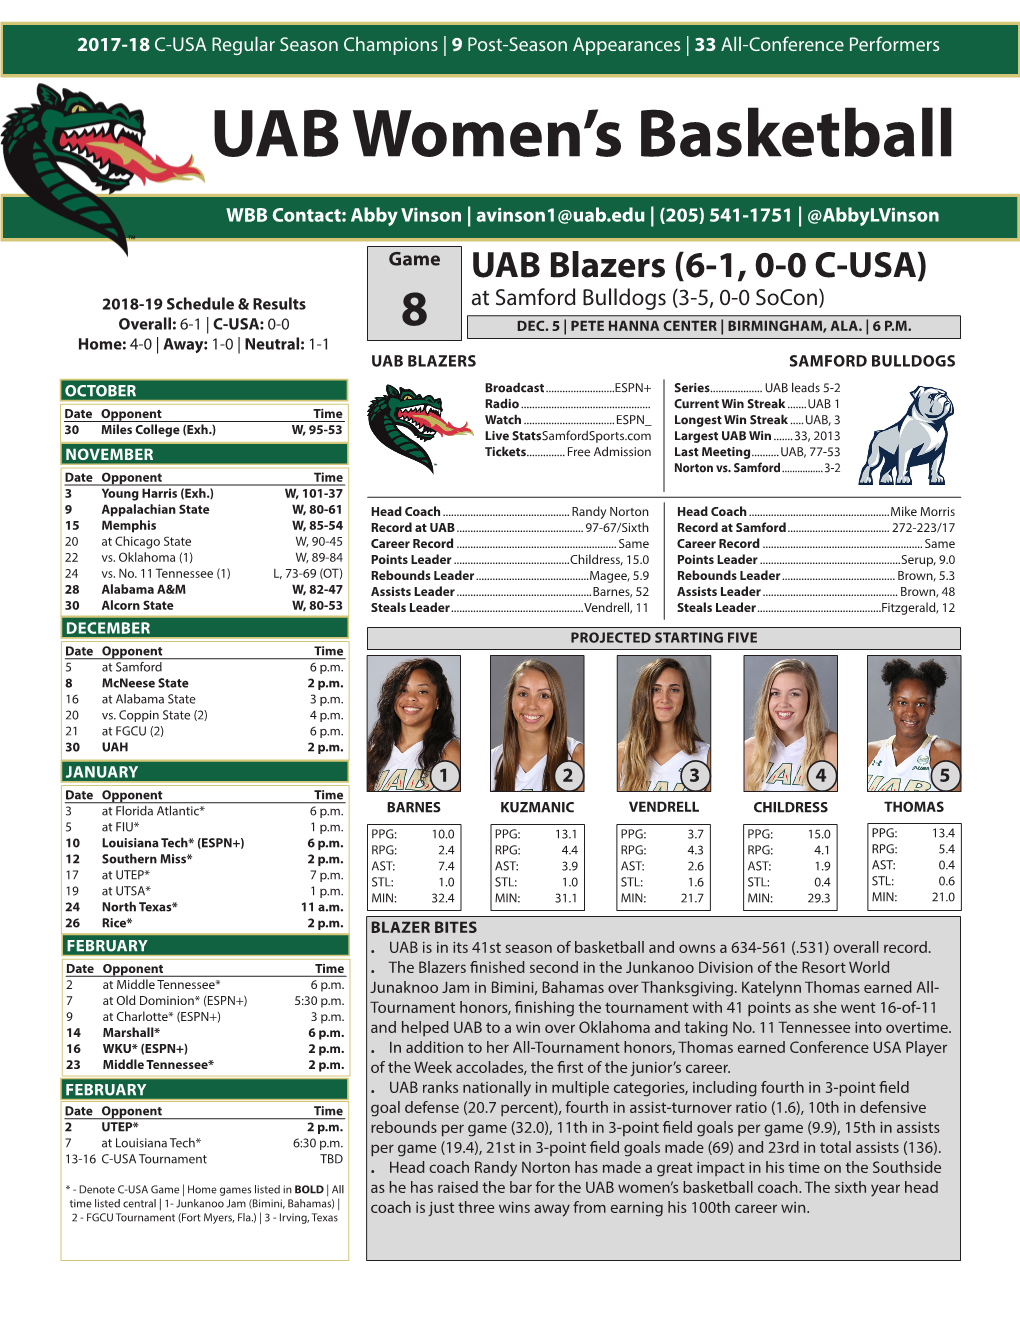 UAB Women's Basketball UAB Combined Team Statistics (As of Nov 12, 2018) All Games